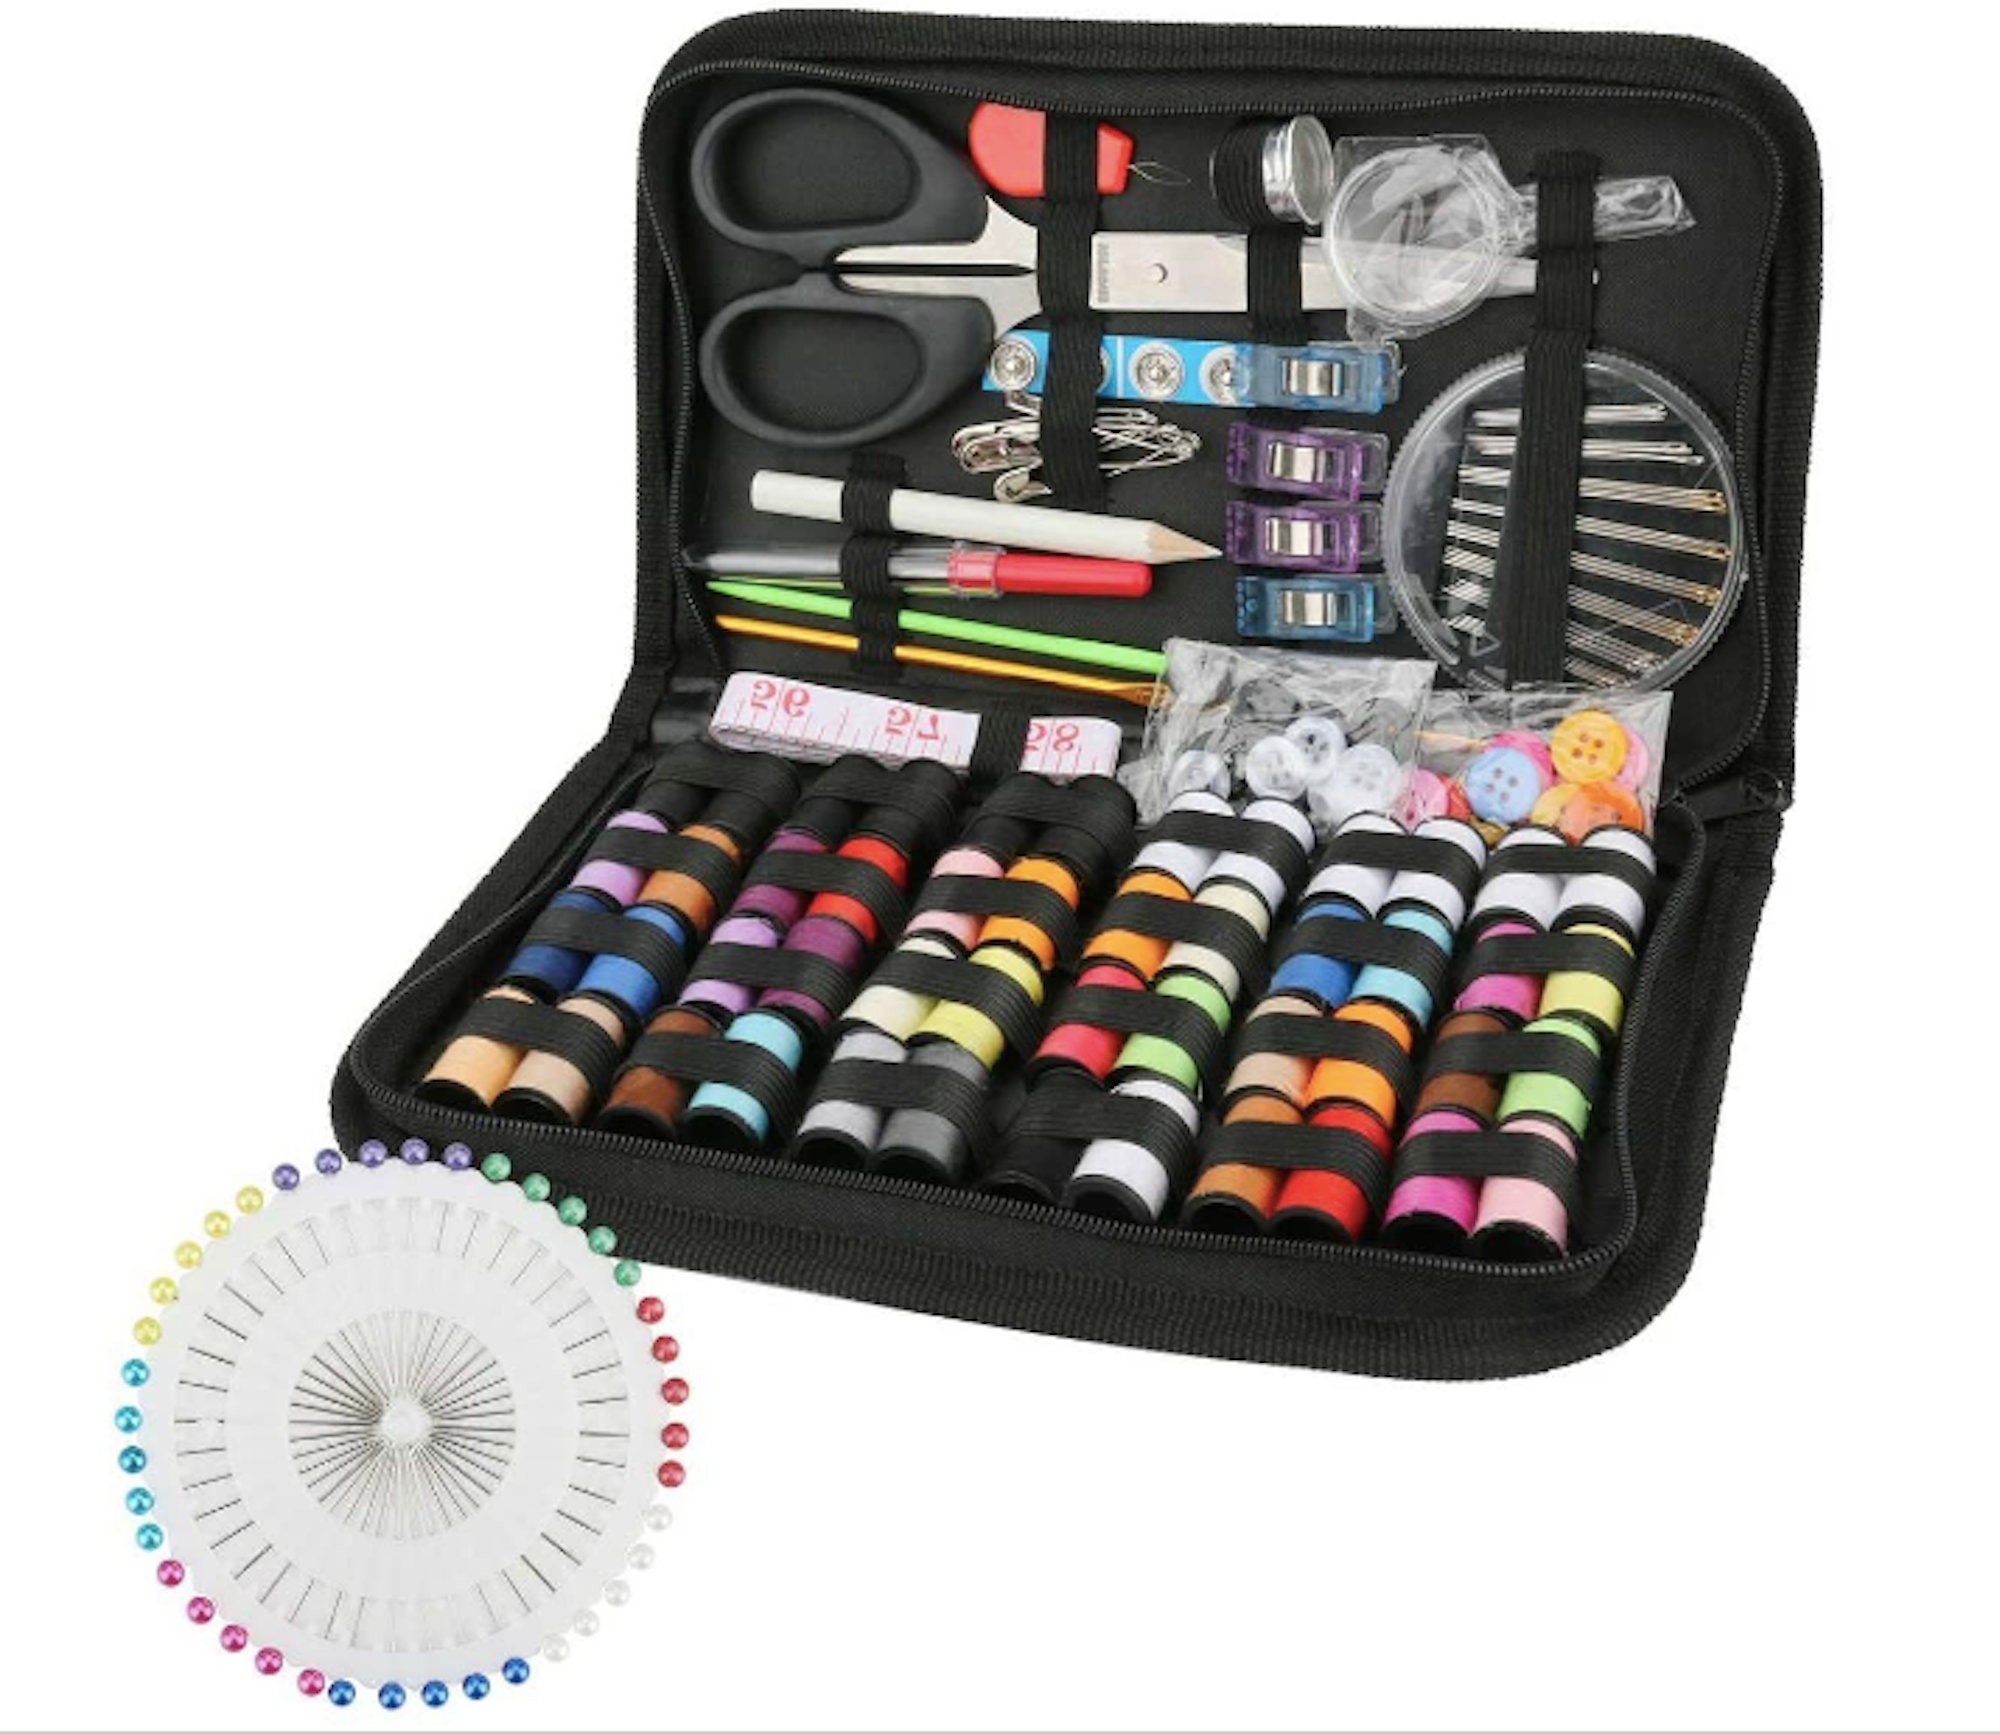 Travel Hotel Mini Home Portable Sewing Kit for Needlework - China